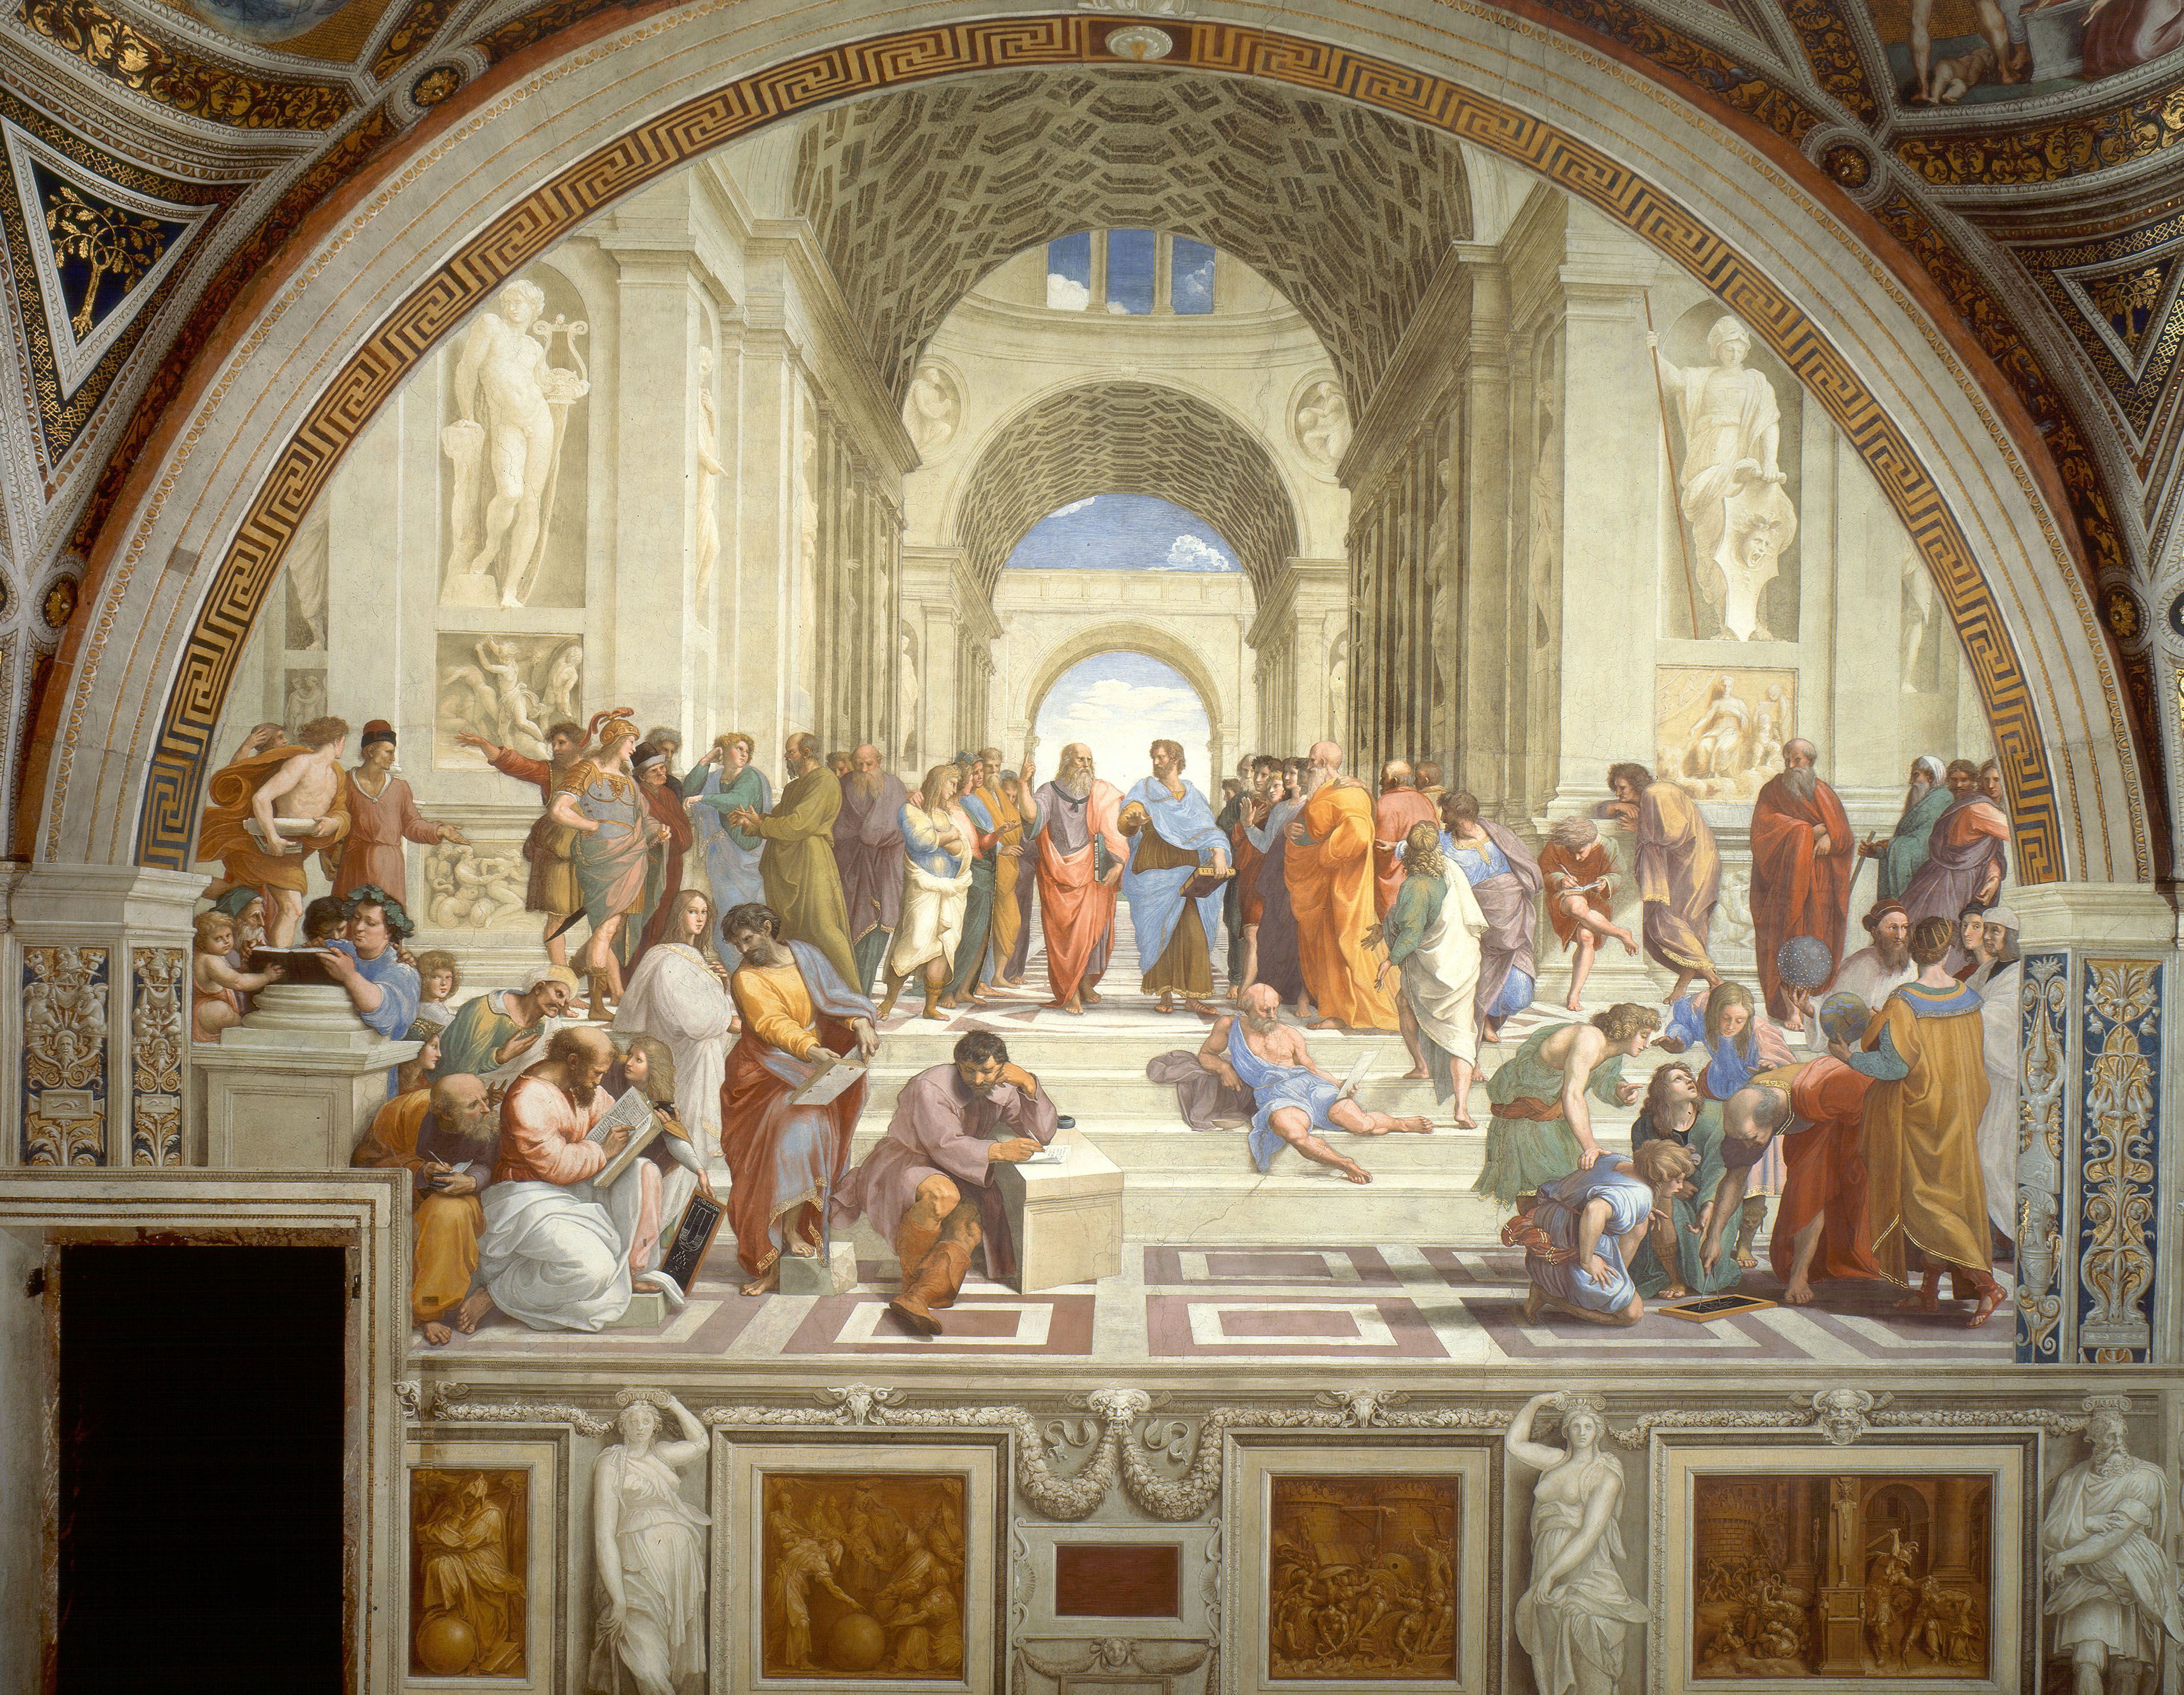 The school of Athens - people talking and reading